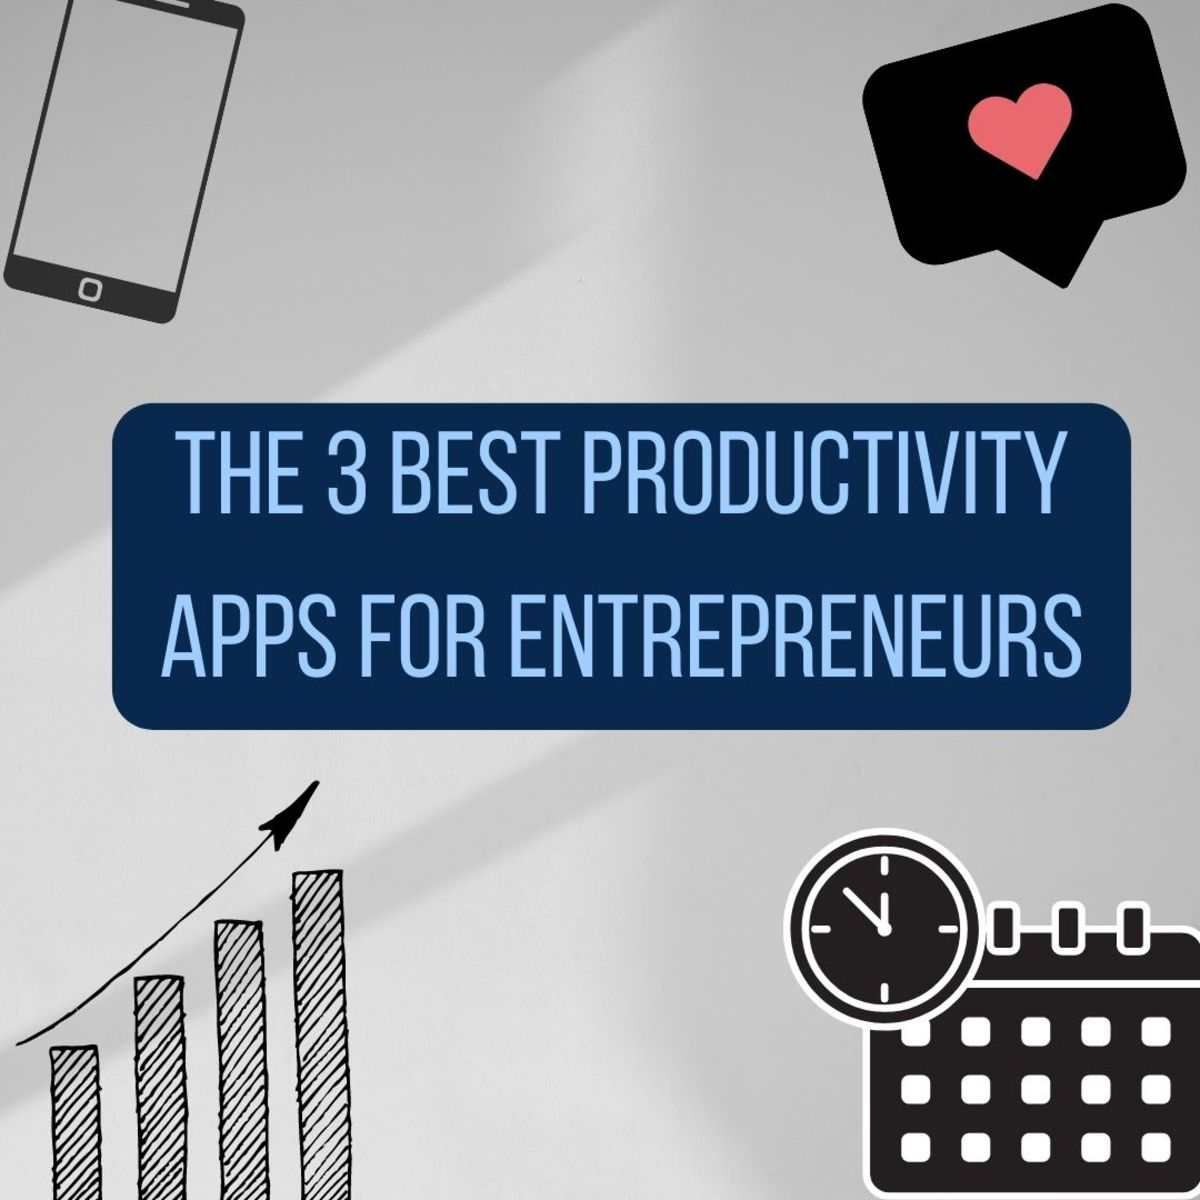 The 3 Best Productivity Apps for Entrepreneurs and Remote Work